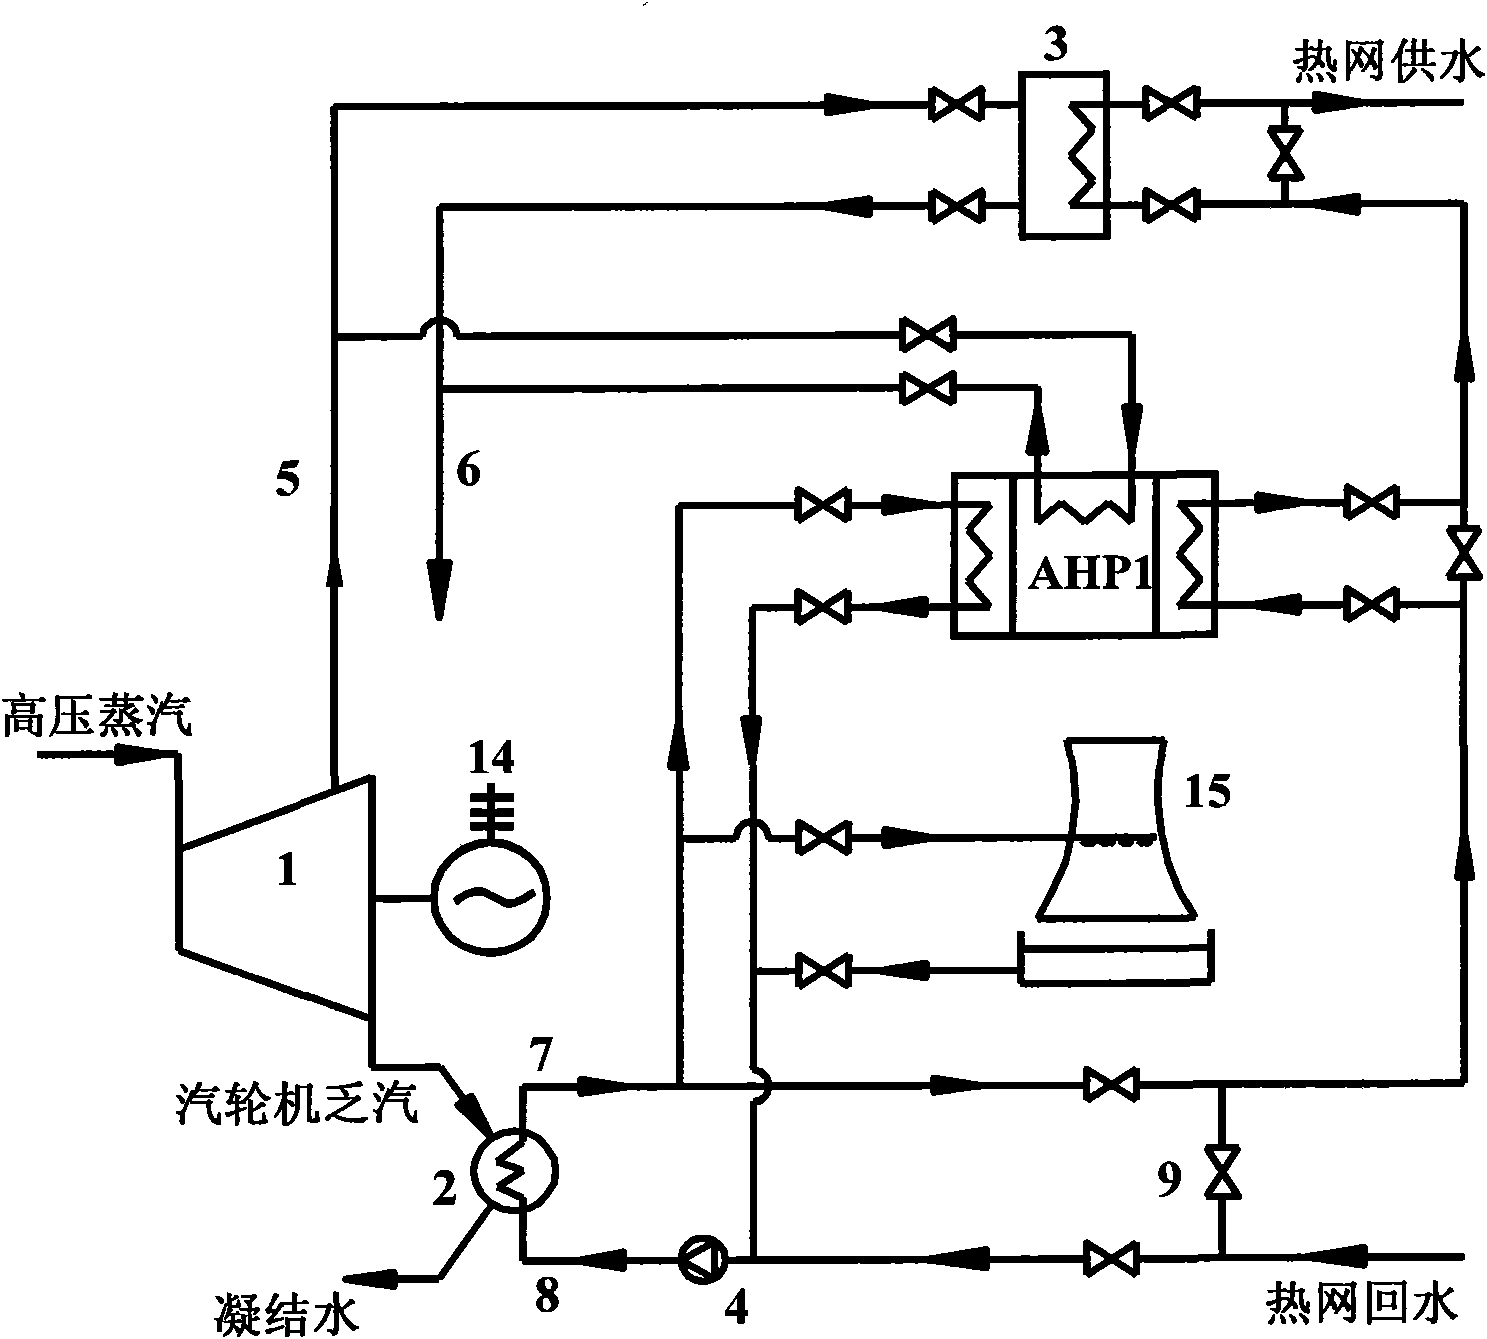 Method for recovering waste heat of thermal power plant and heating and supplying heat to hot water in a stepping way